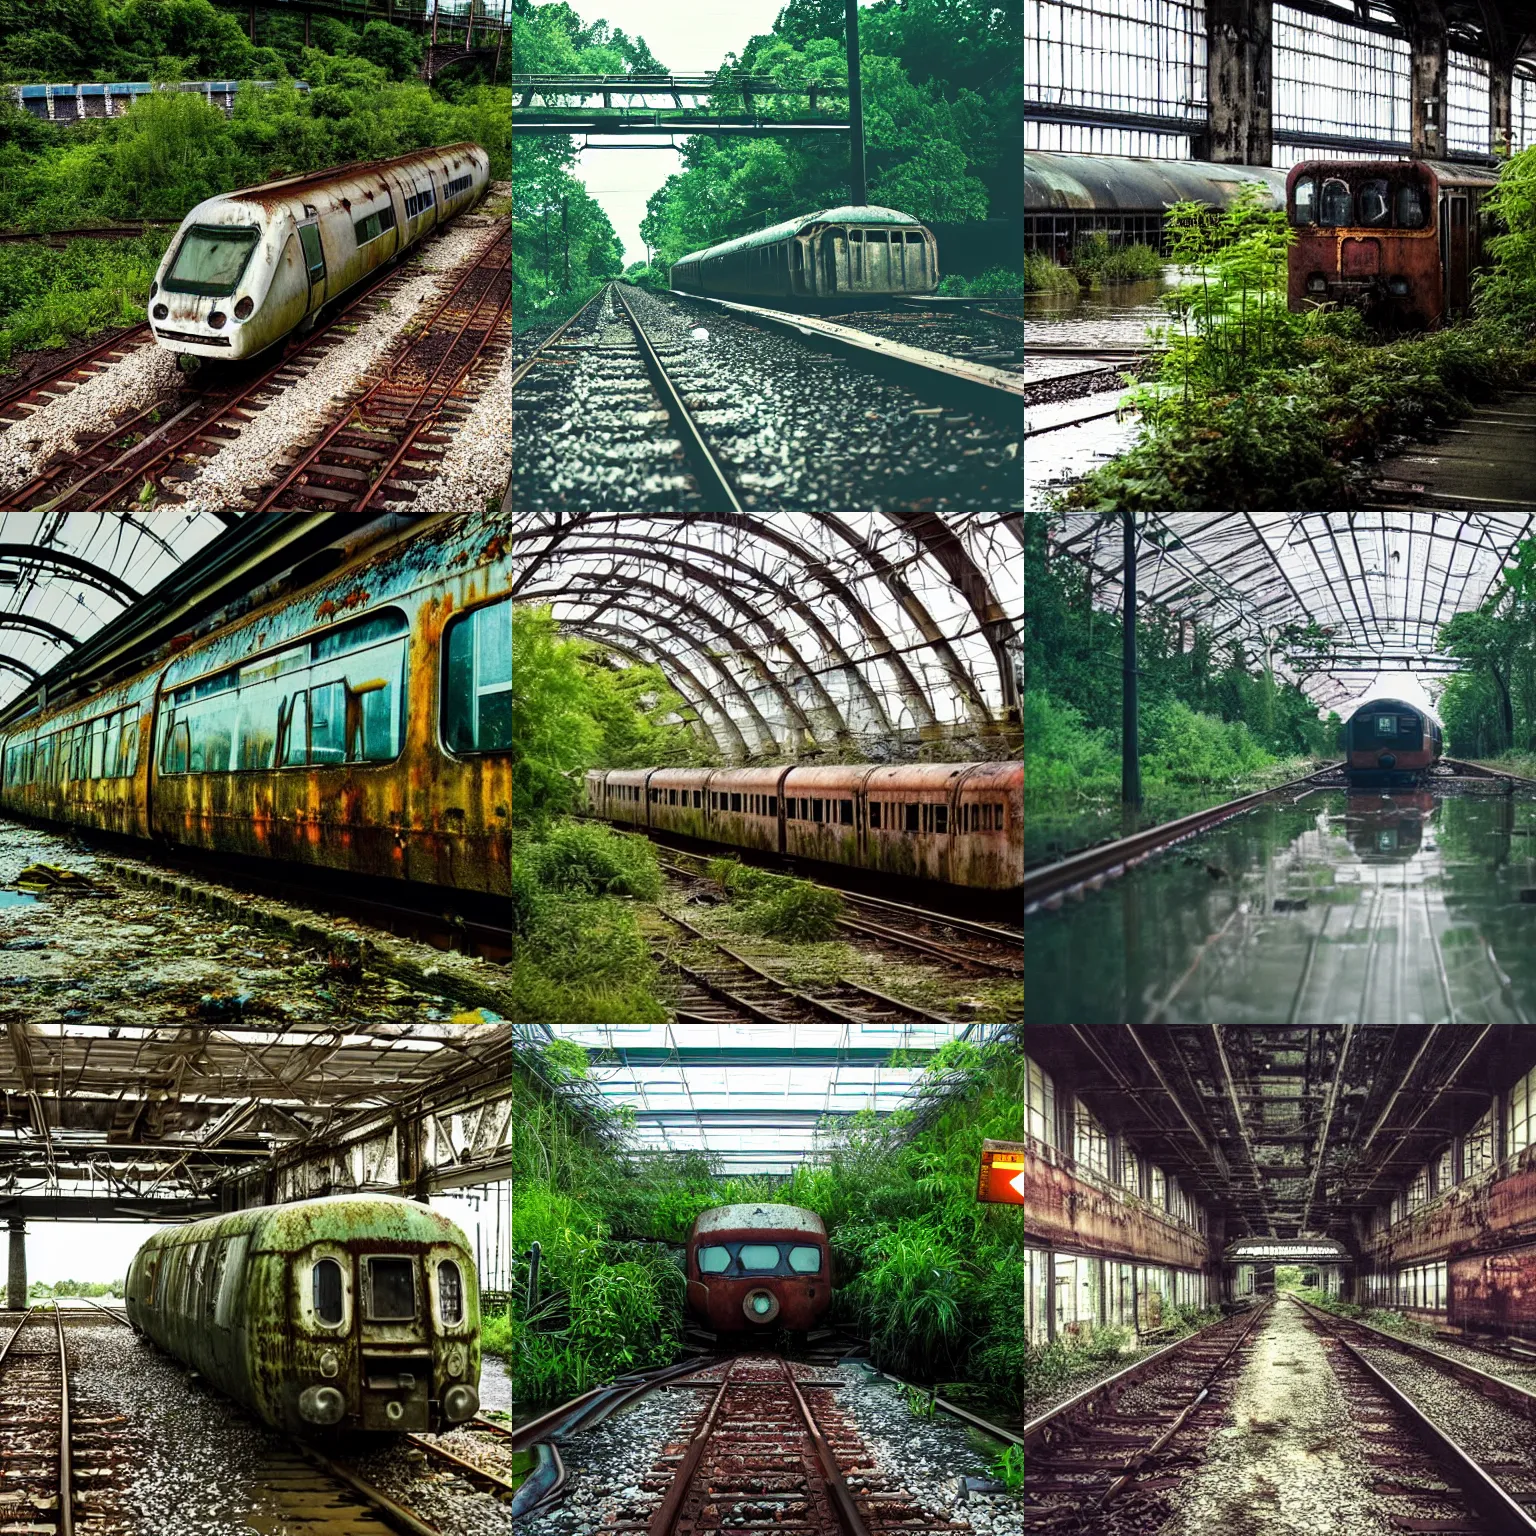 Prompt: an abandoned rusted!!!!!!!!!! train, alone, in an empty dark flooded train station, overgrown with aquatic plants